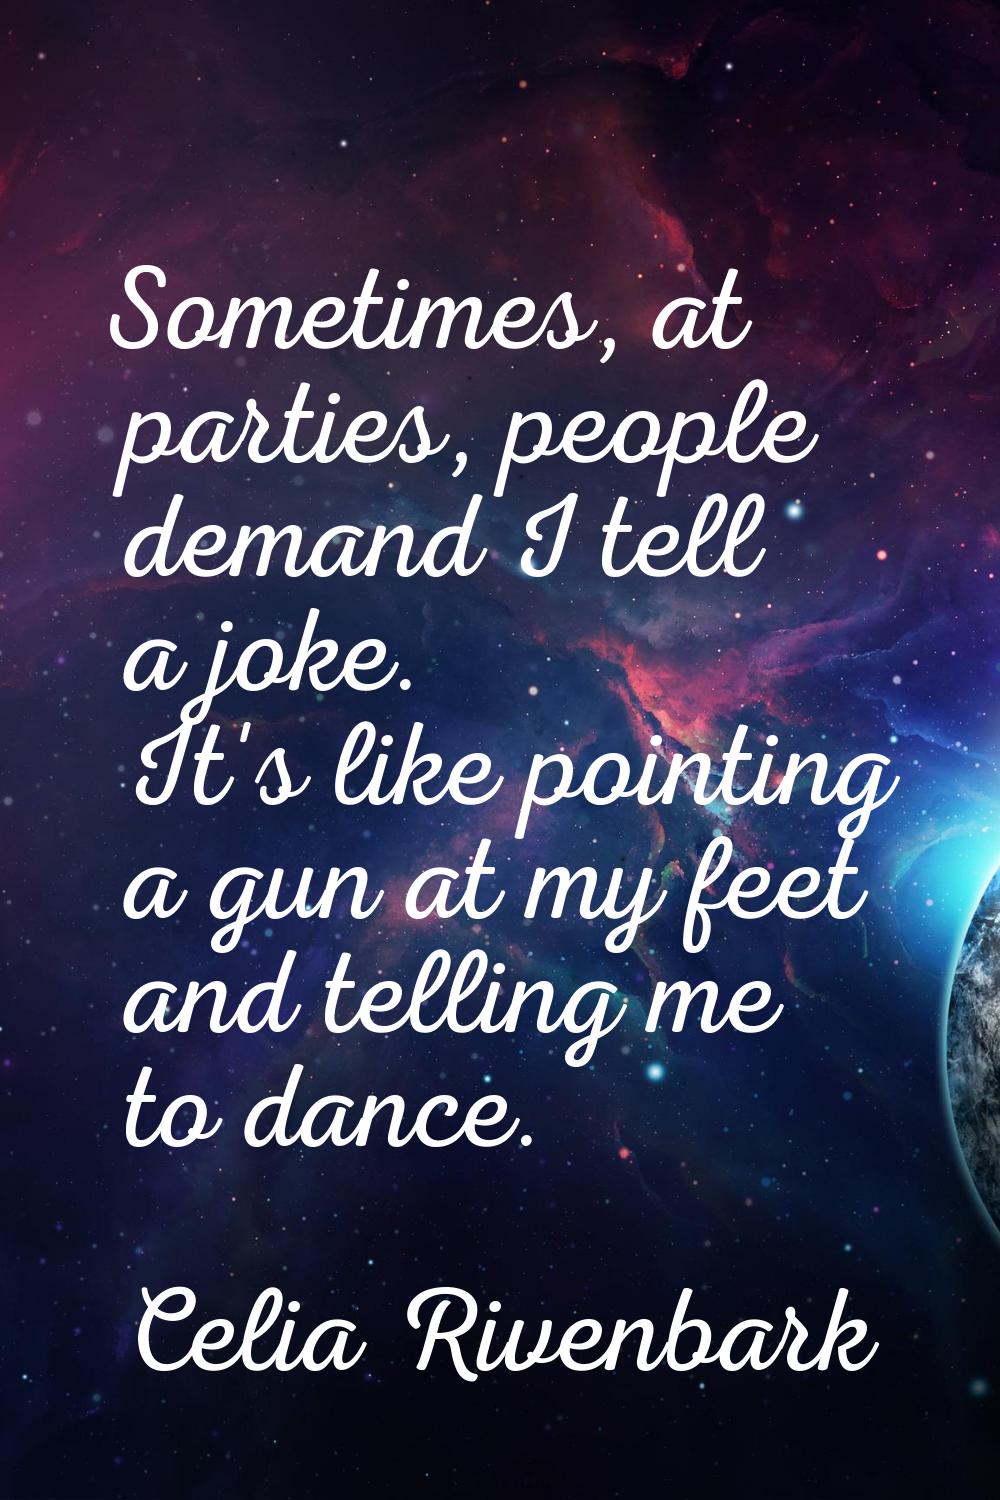 Sometimes, at parties, people demand I tell a joke. It's like pointing a gun at my feet and telling